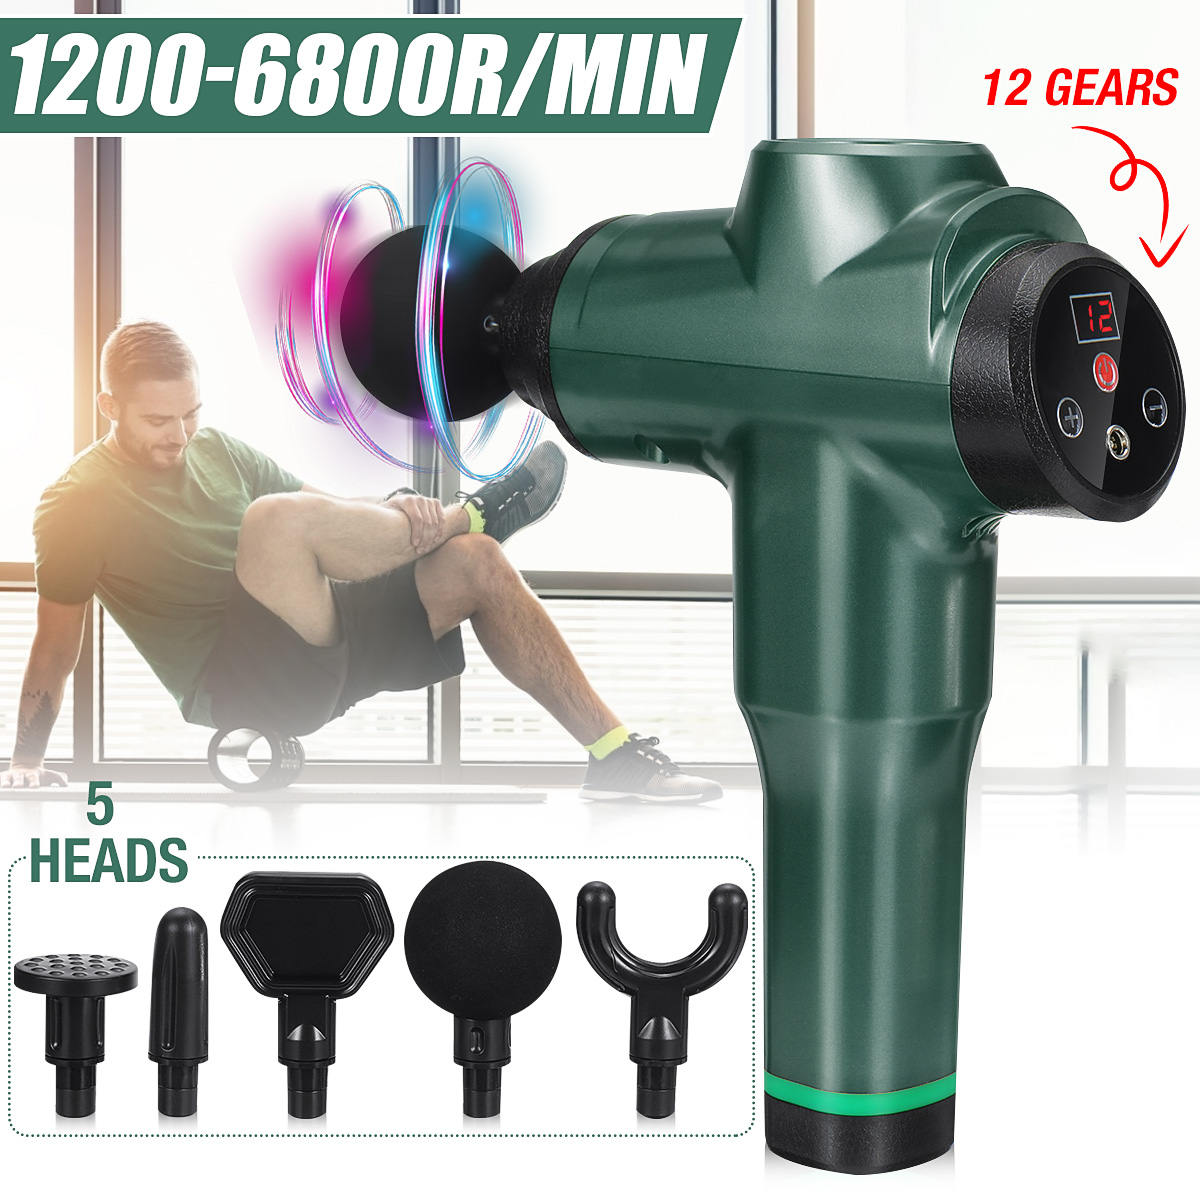 Display-12-Gear-Percussion-Massager-3600mAh-Vibration-Deep-Tissue-Muscle-Relaxation-Electric-Massage-1682388-1